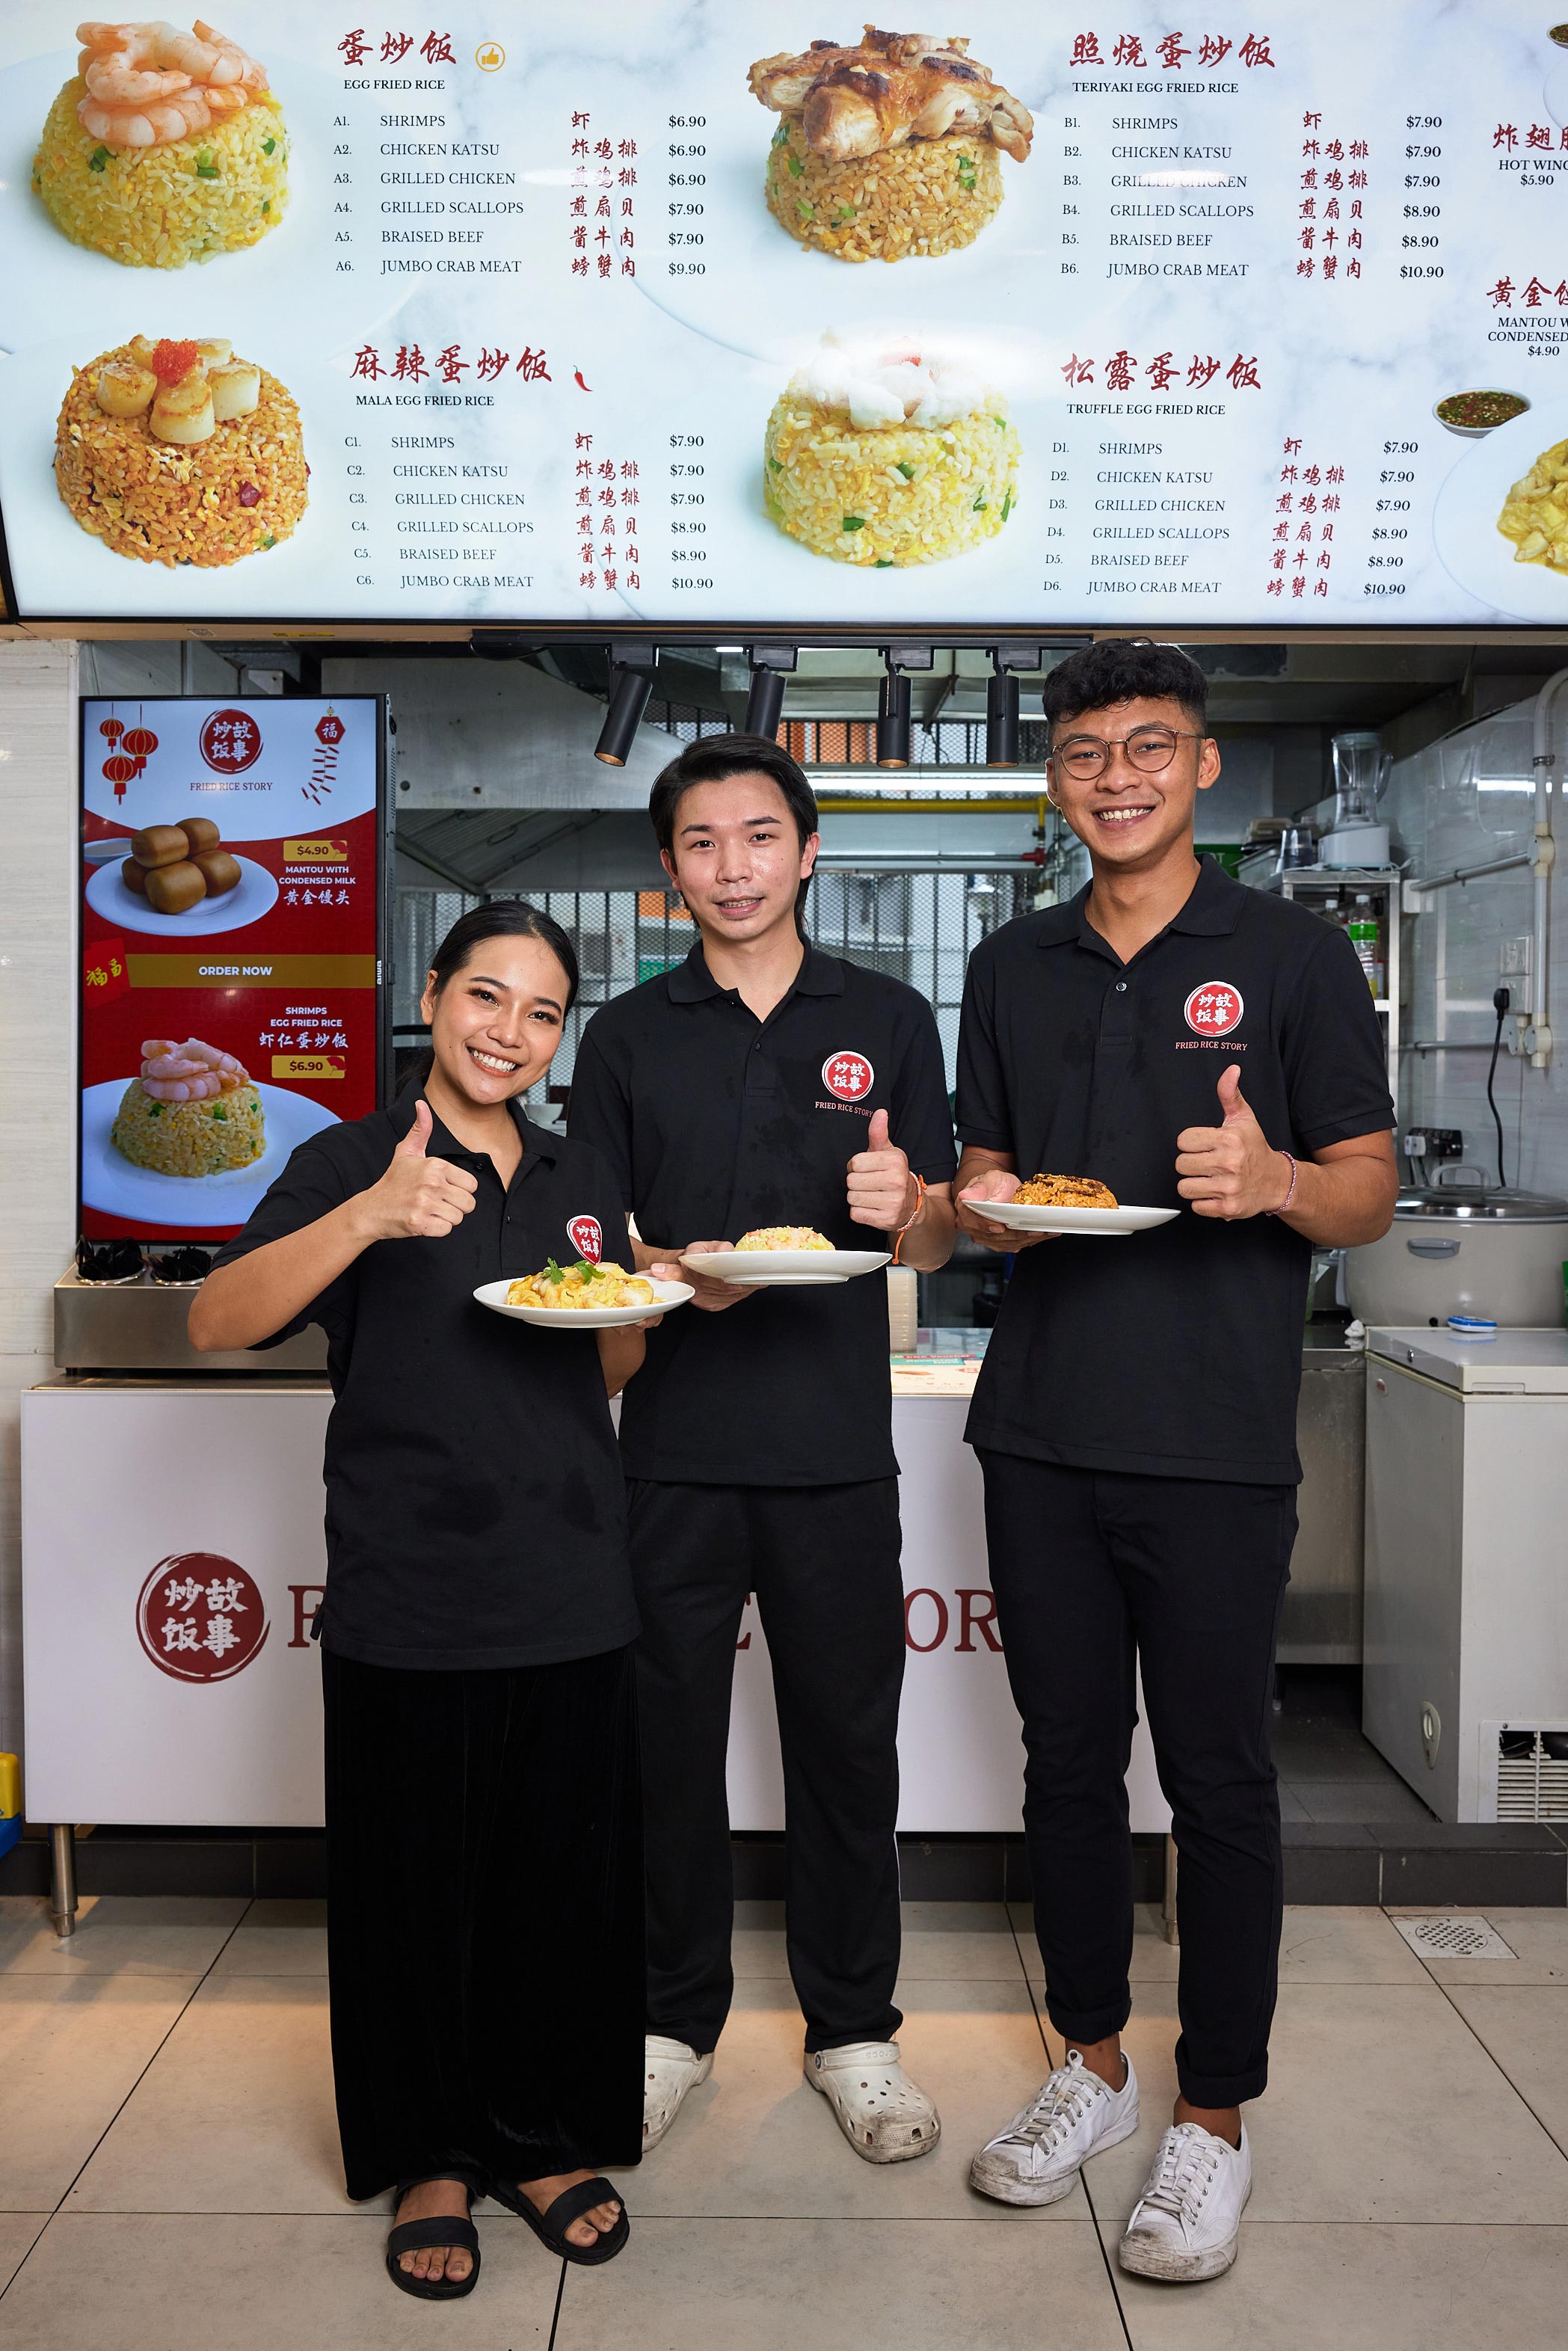 The trio used to work together at another popular F&B chain